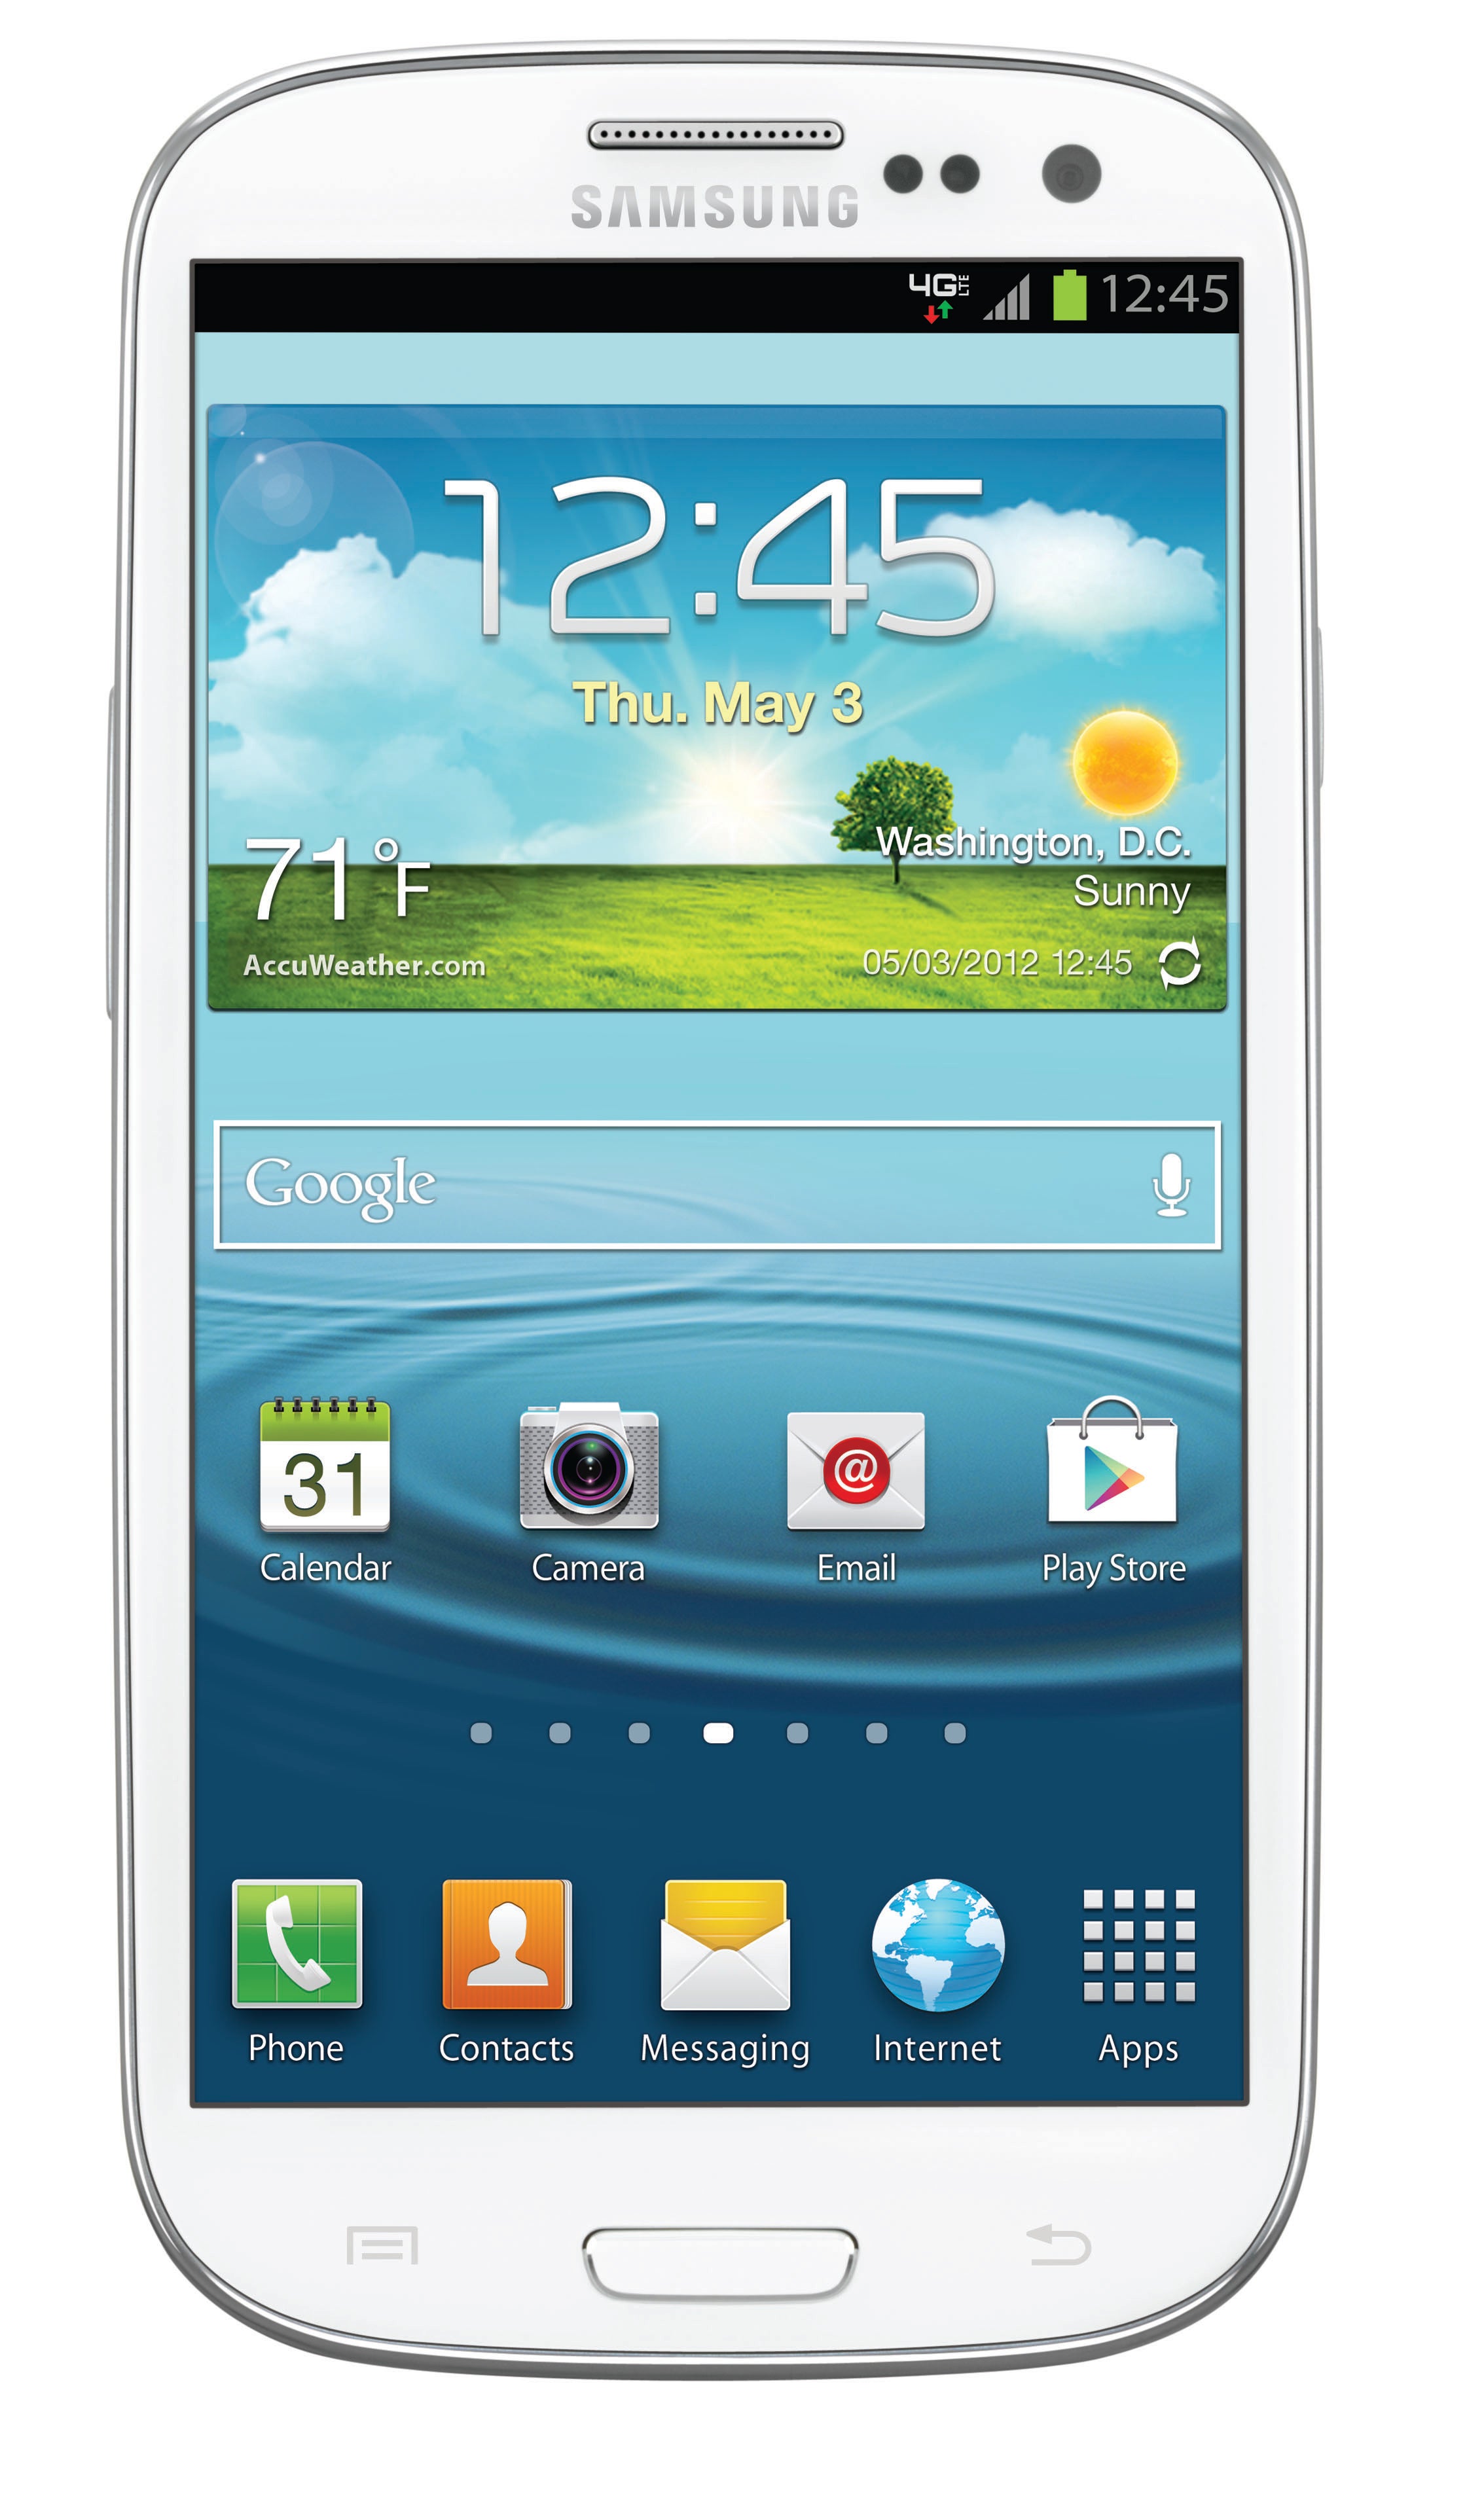 Stock image available - Stock firmware image available for Verizon Samsung Galaxy S III